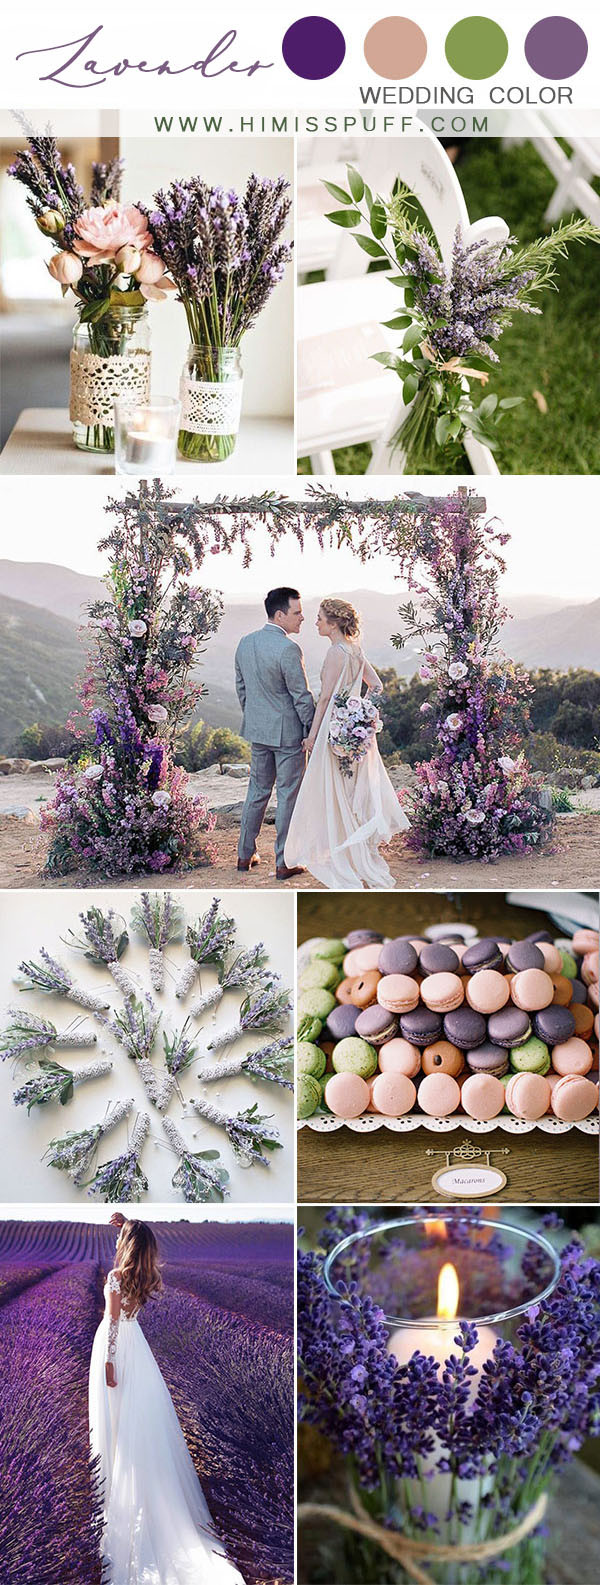 Spring Wedding Colors 2020
 Top 10 Wedding Color Scheme Ideas for 2020 – Hi Miss Puff